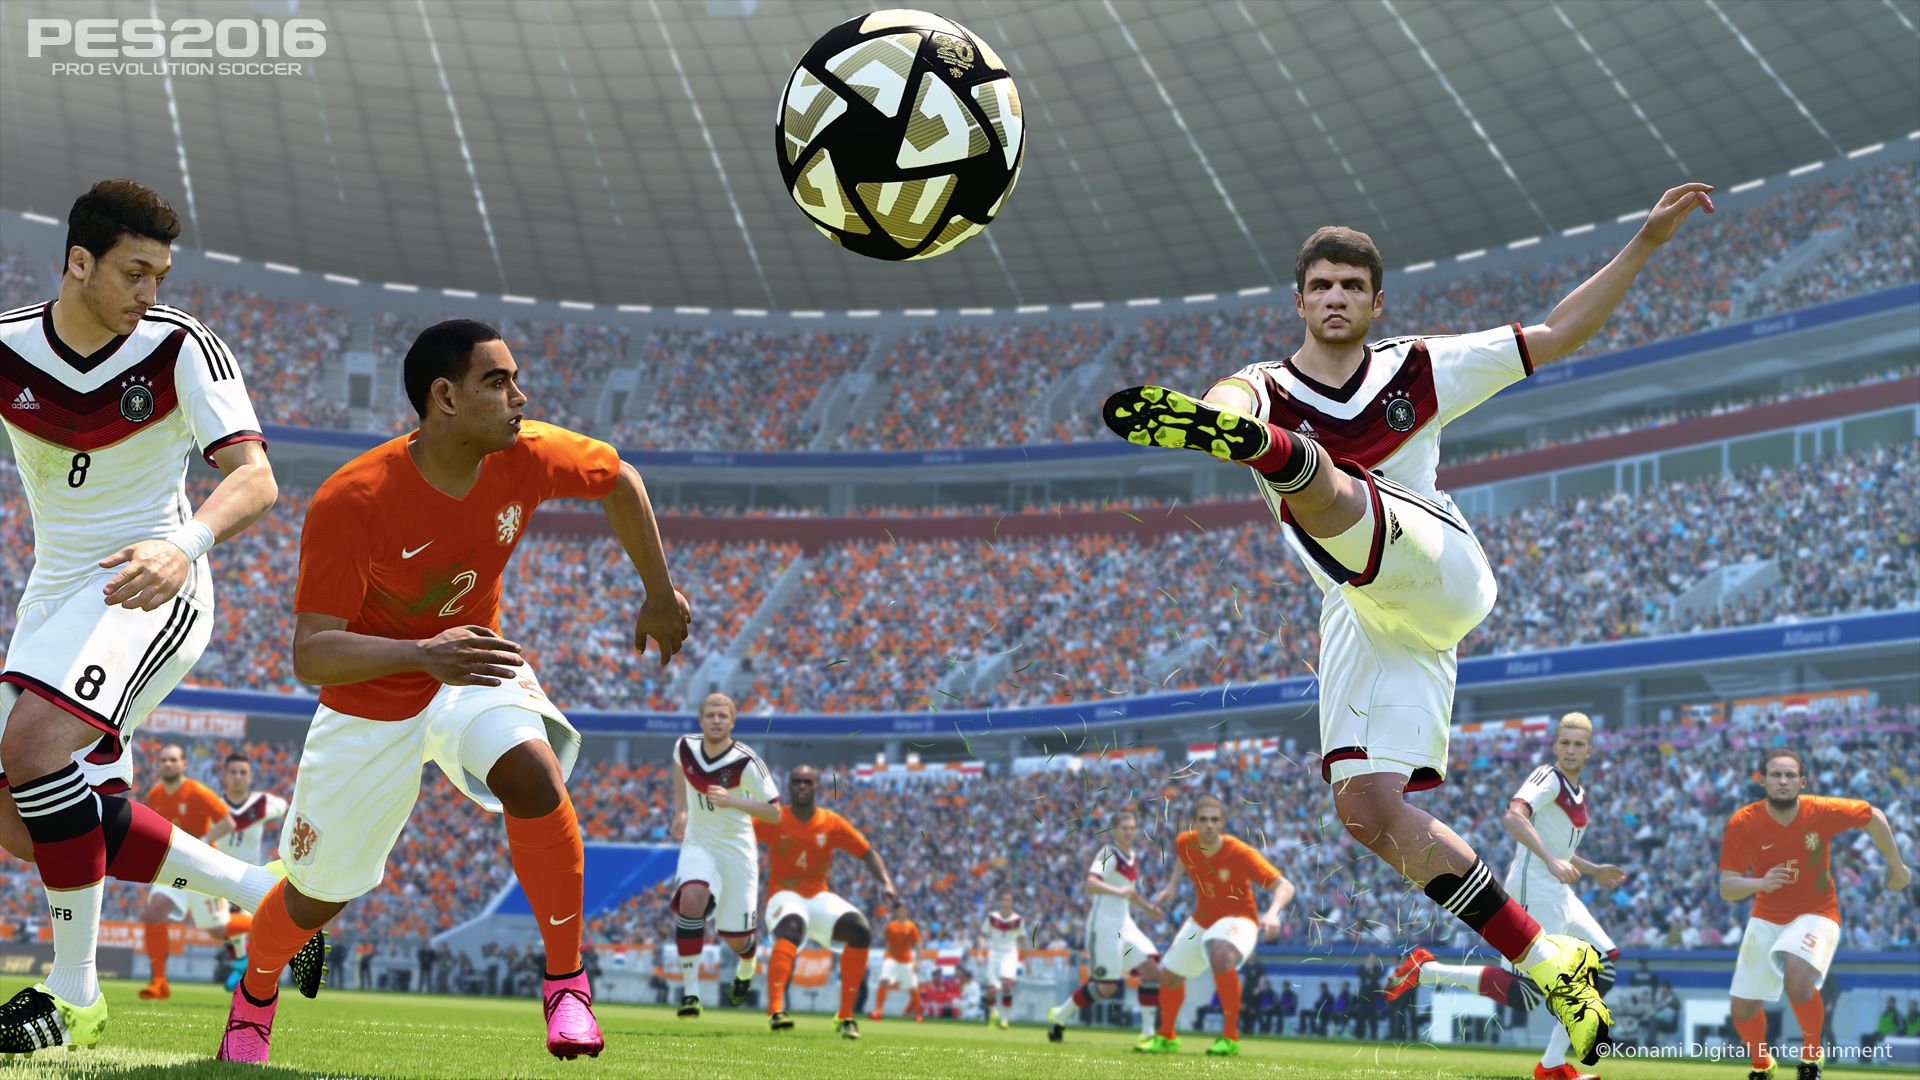 You know those game tips before PES 2016 game? I'm collecting them – PES  Expert